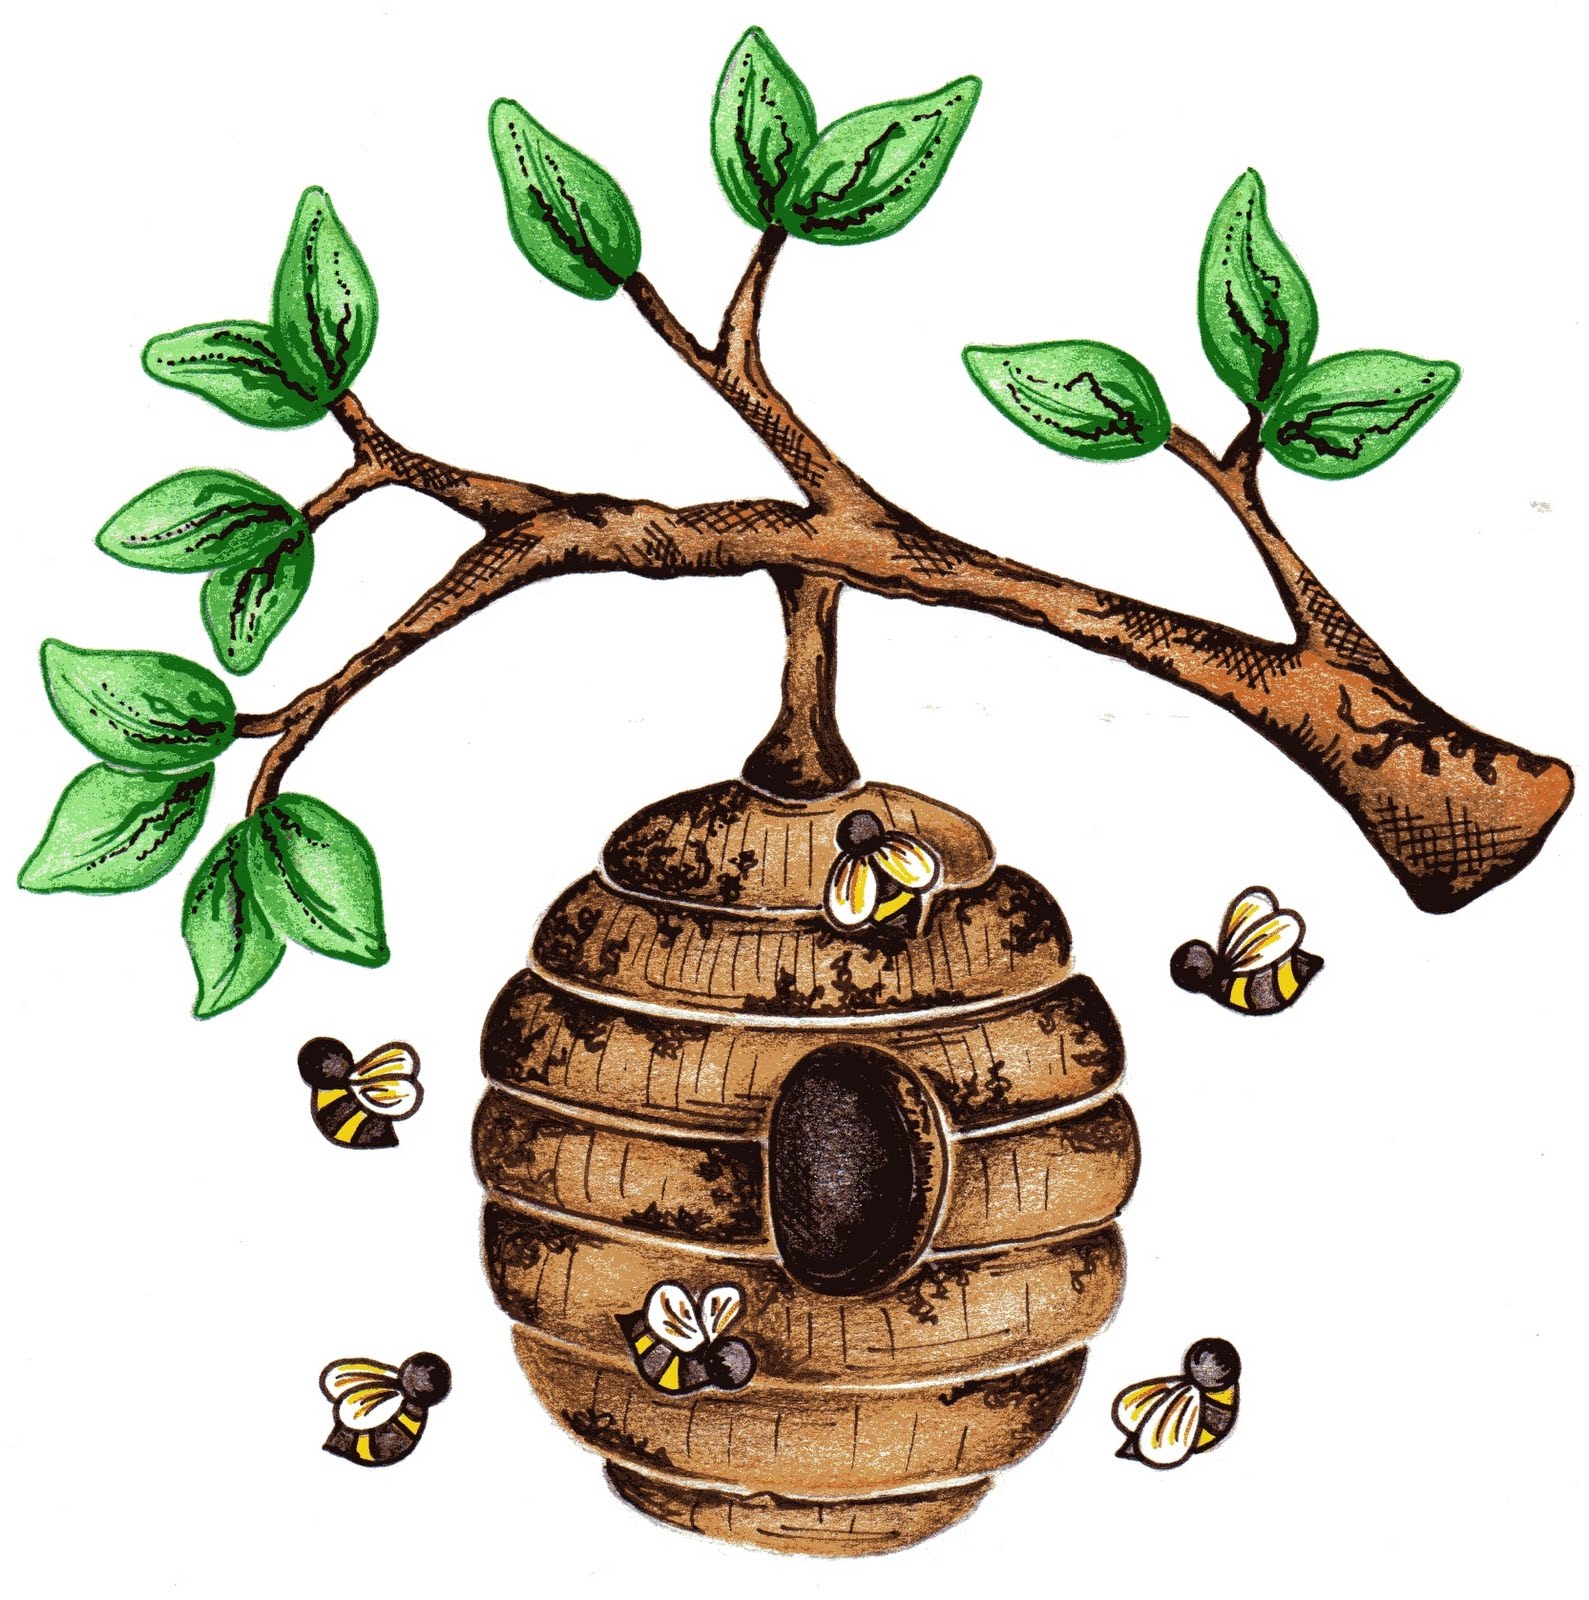 Beehive images for bee hive in tree clip art